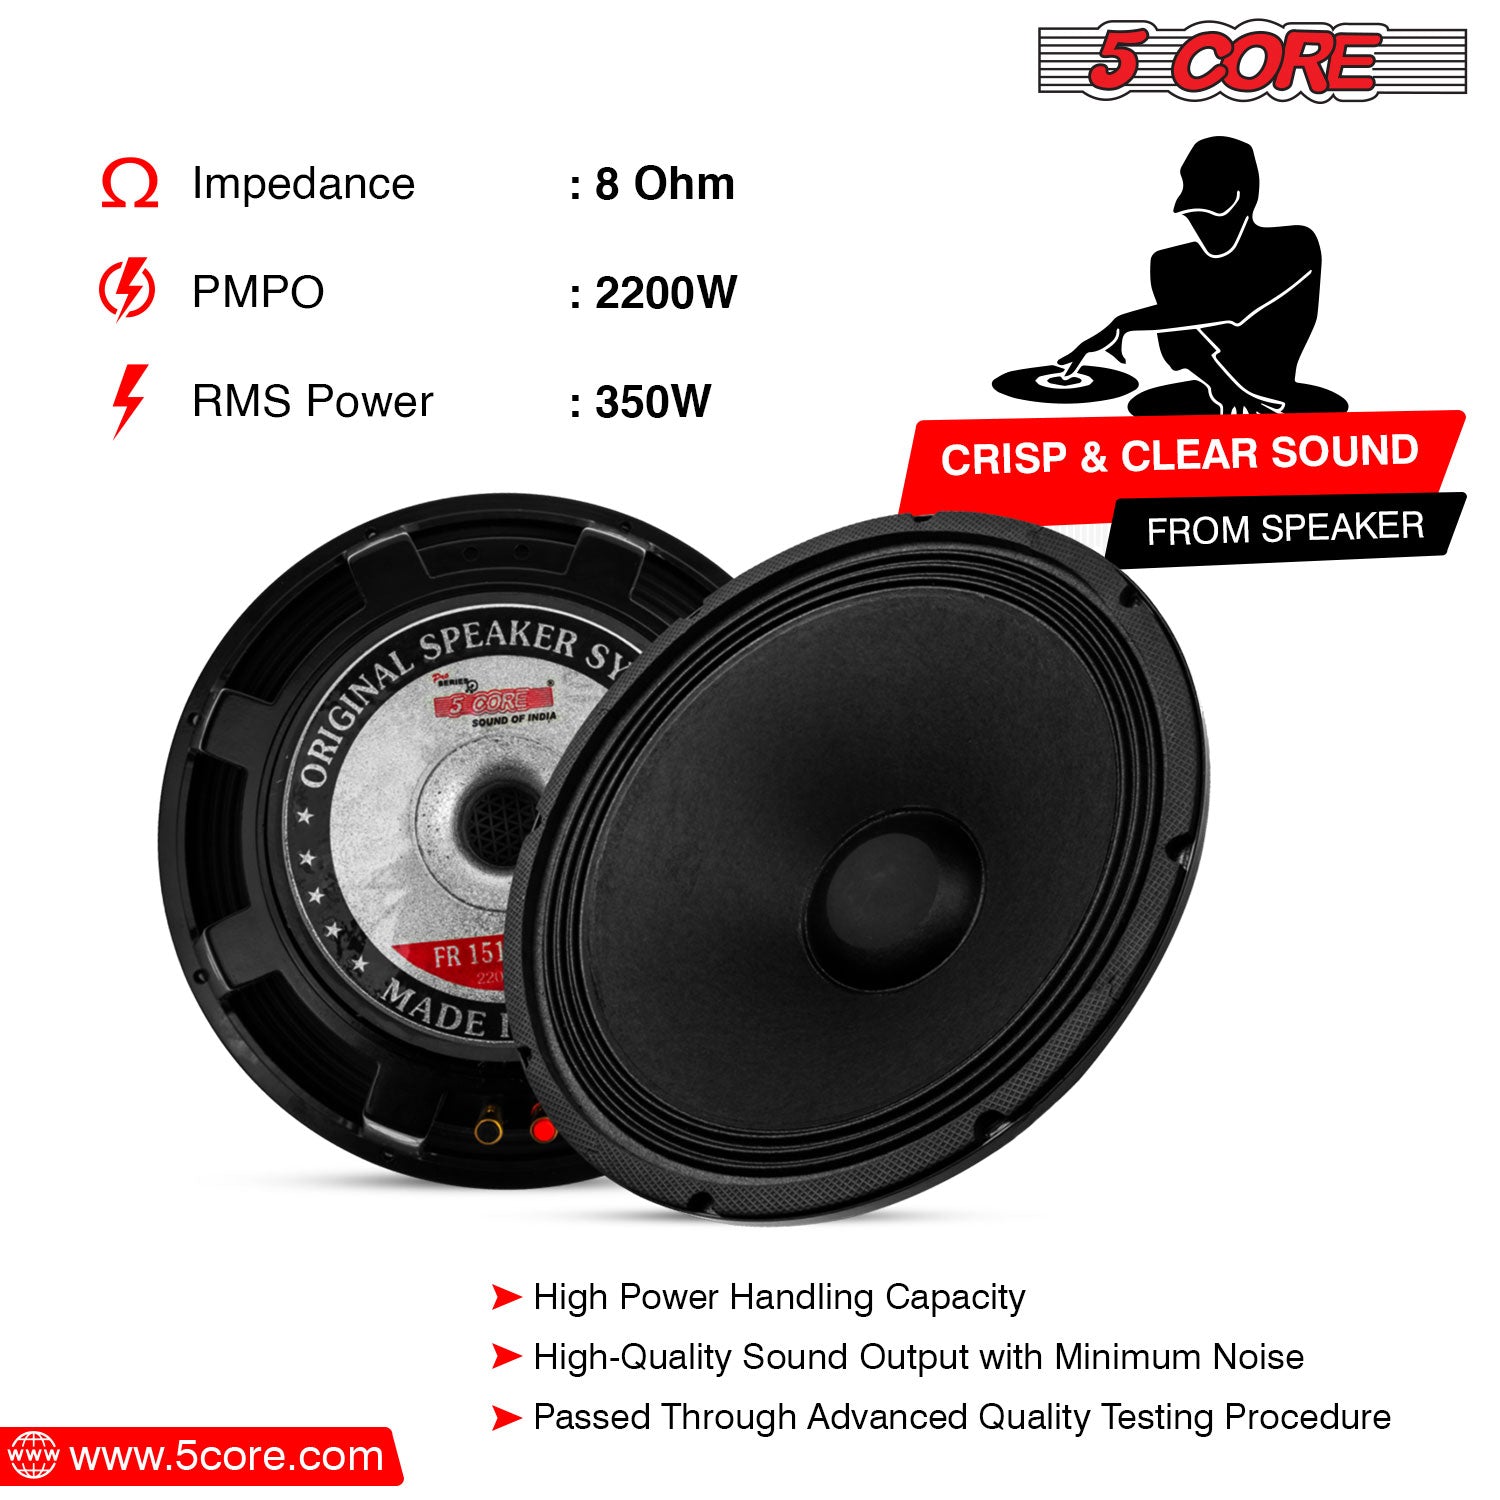 Crisp & Clear Sound from 15 Inch Subwoofer